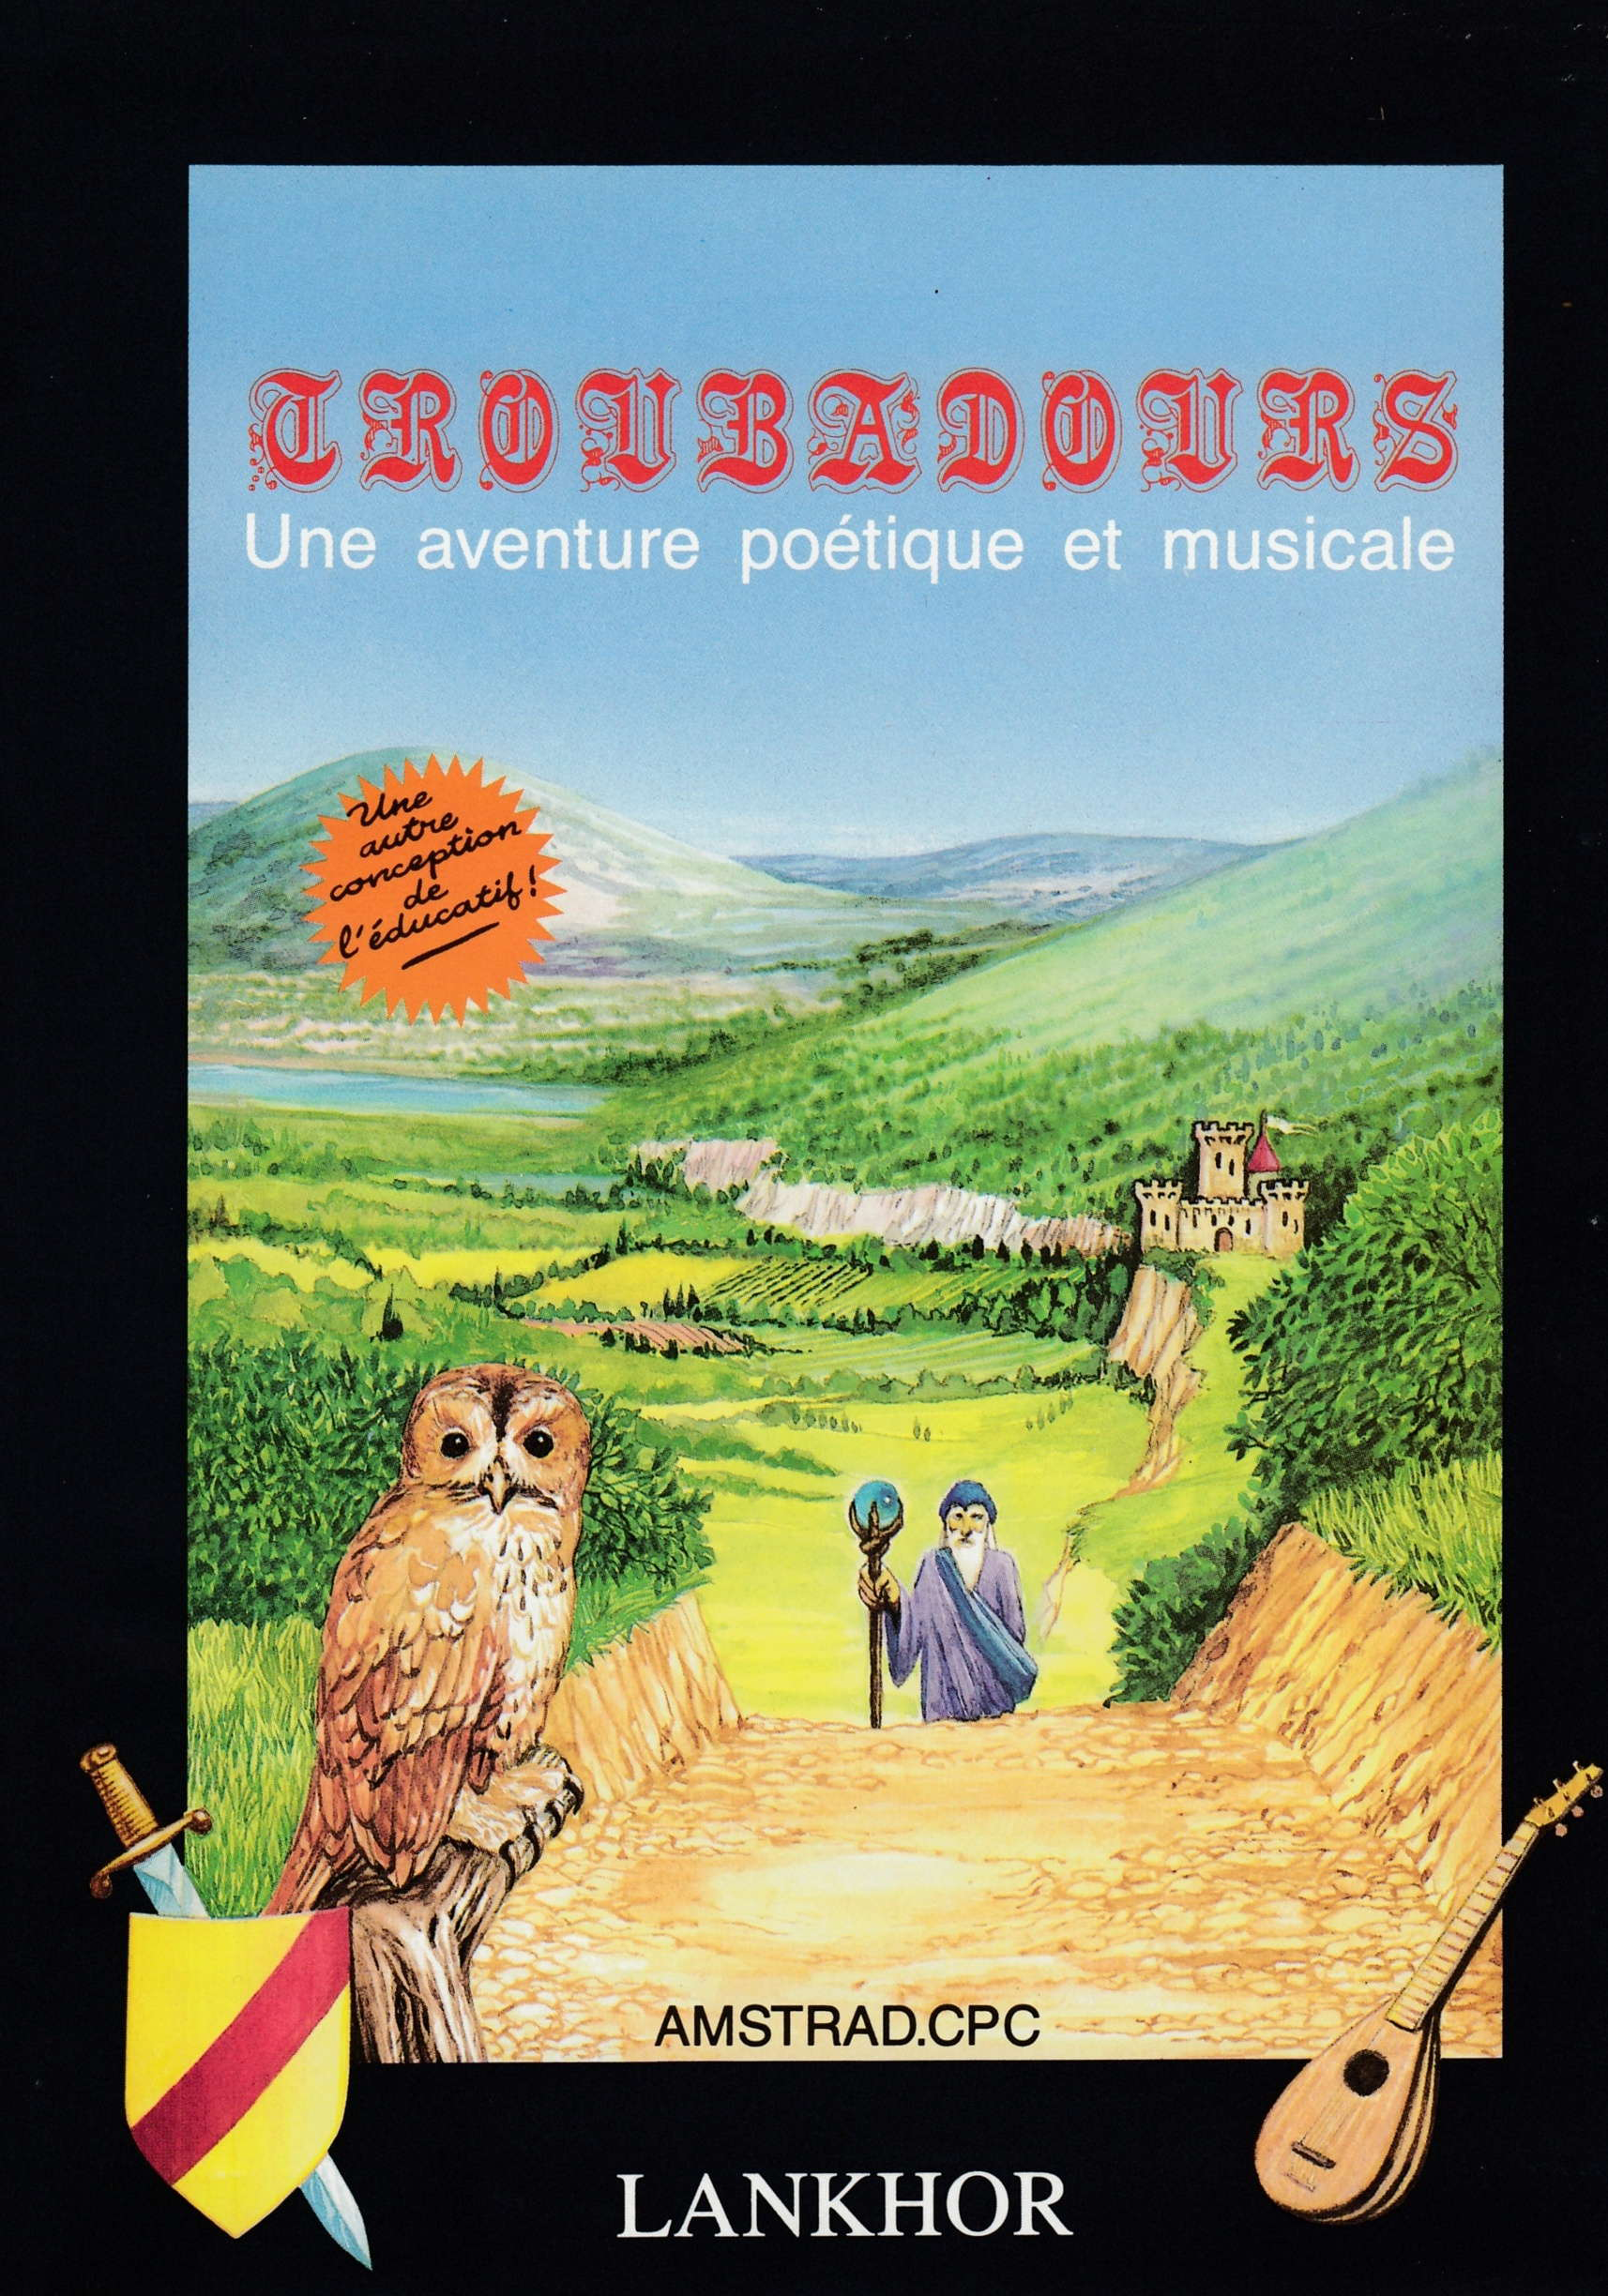 cover of the Amstrad CPC game Troubadours  by GameBase CPC